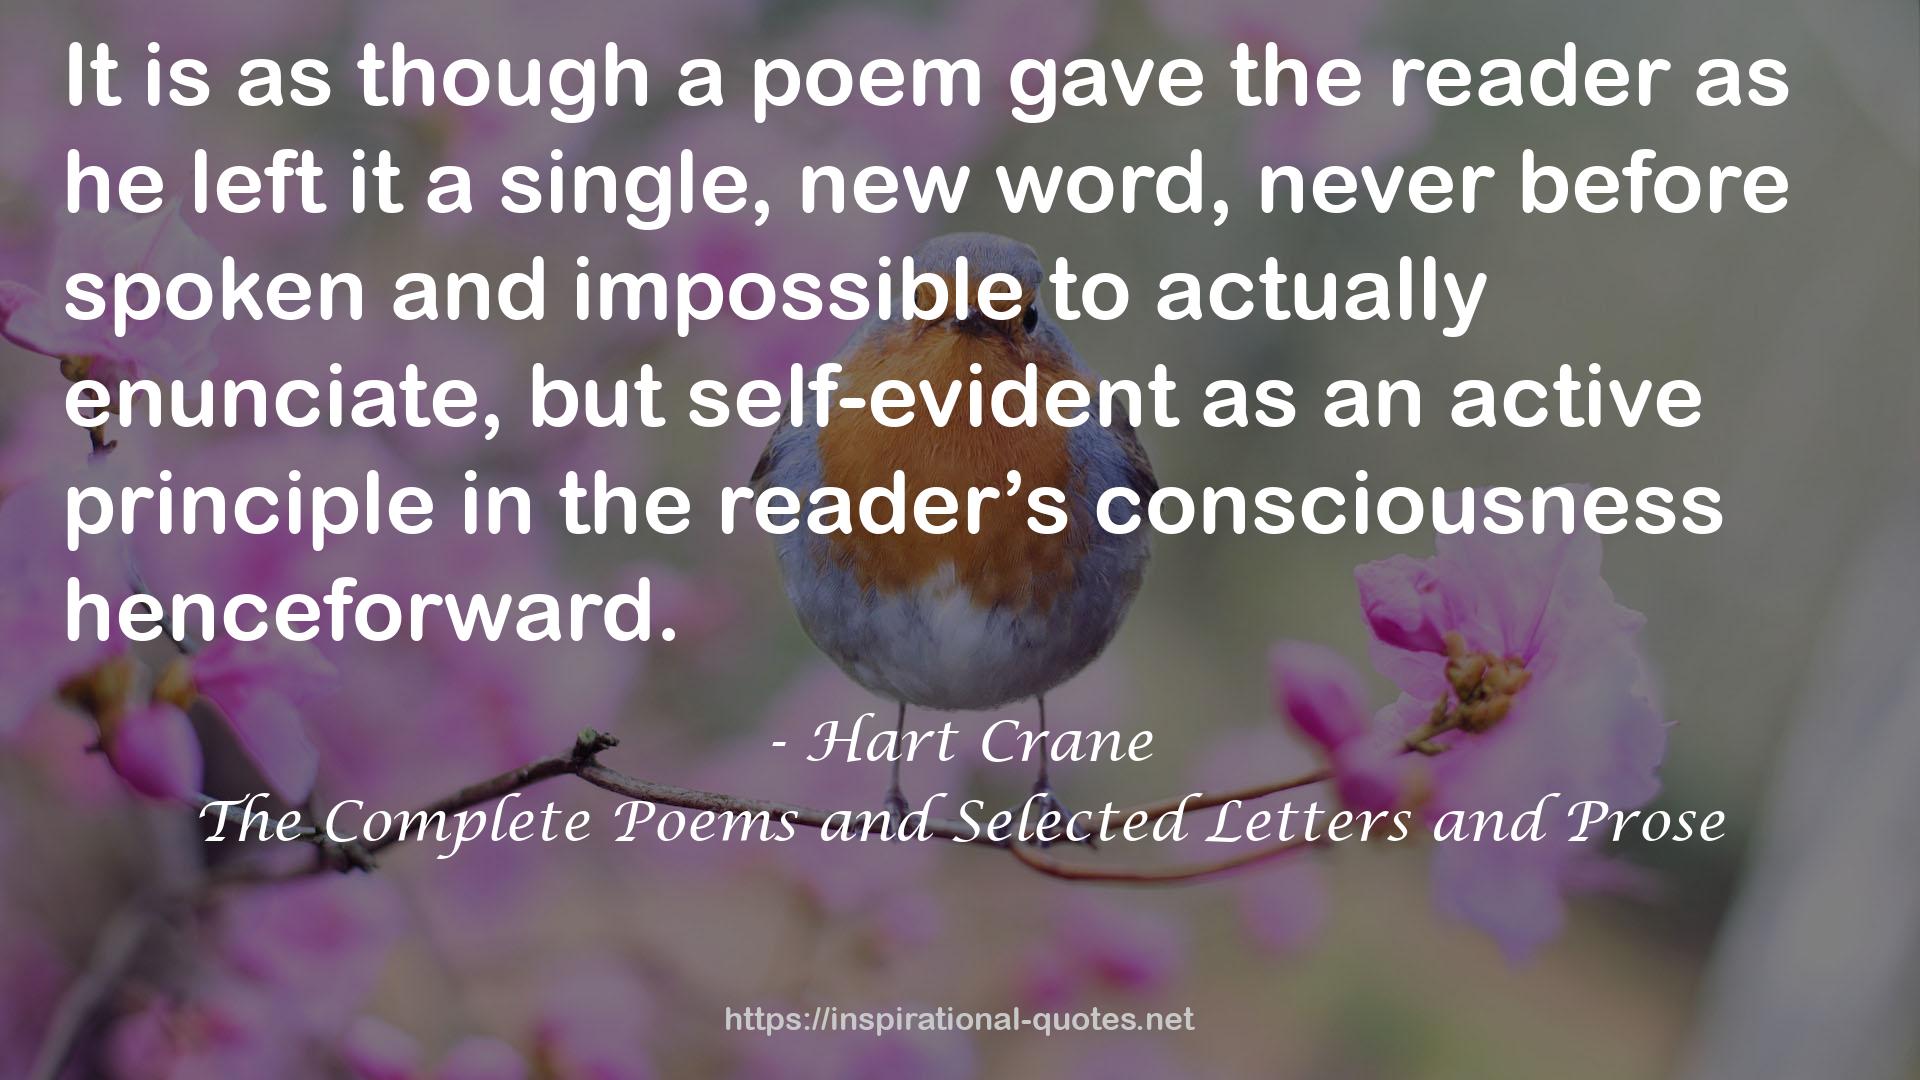 The Complete Poems and Selected Letters and Prose QUOTES